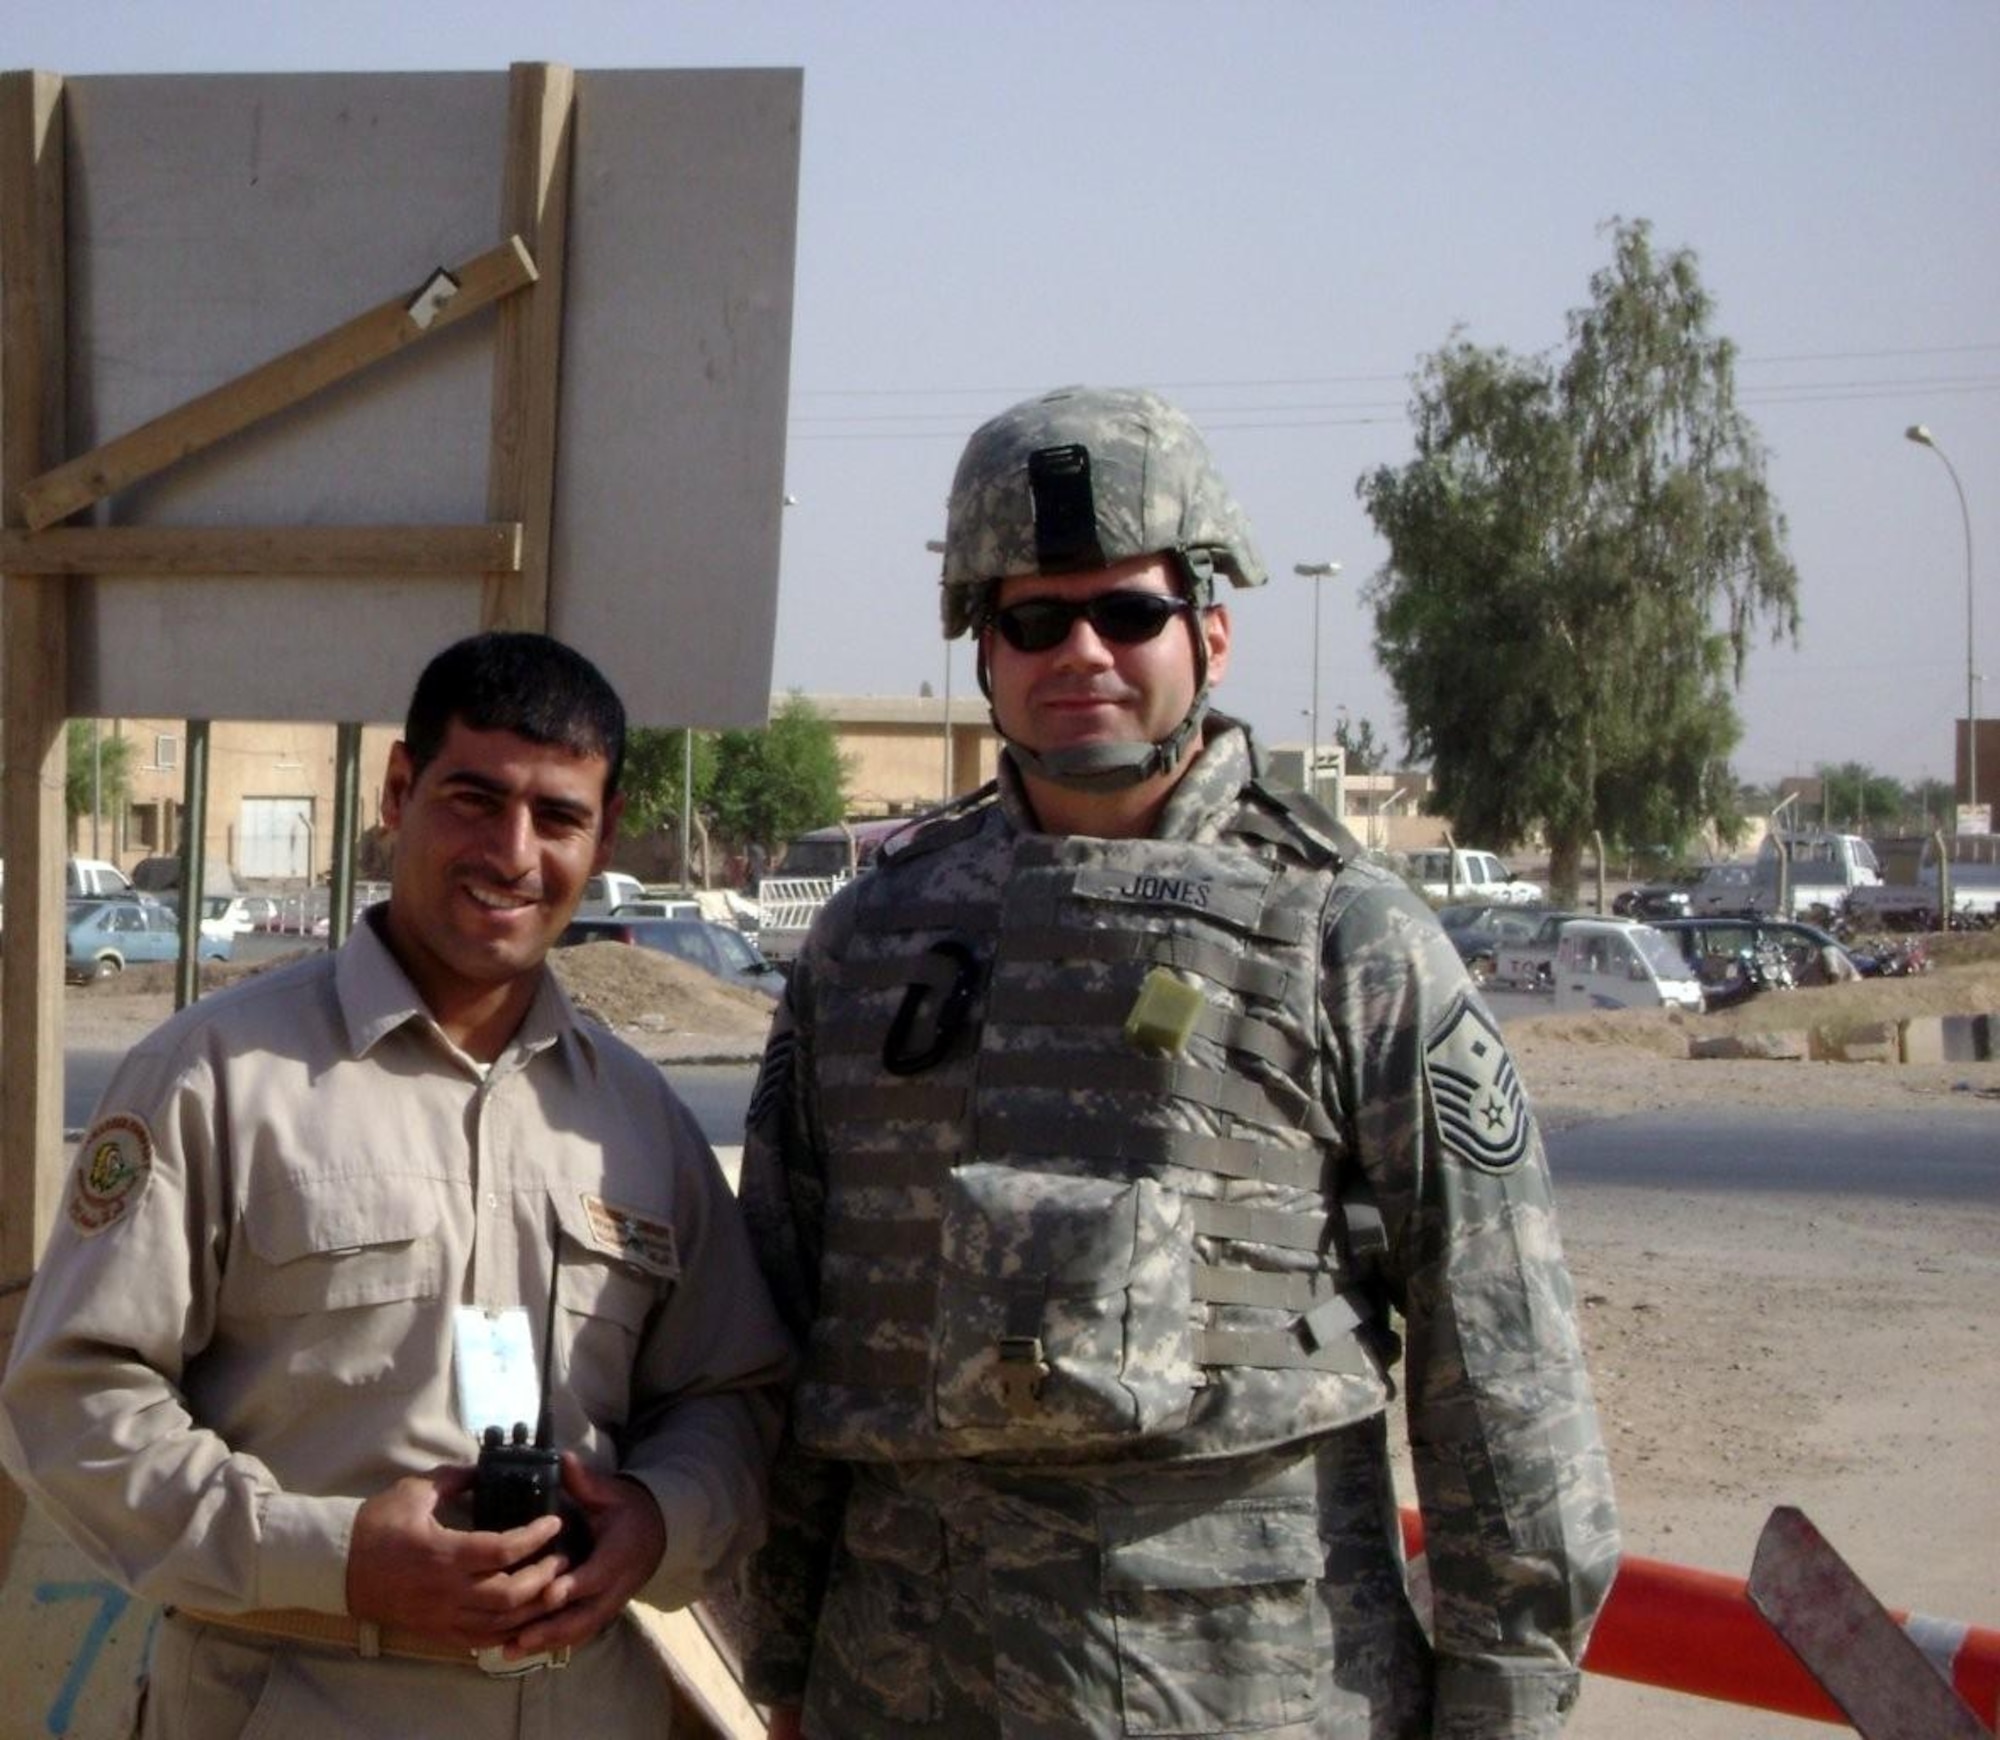 U.S. Air Force then-Master Sgt. Beau Jones, right, then-332nd Security Forces Group first sergeant, poses for a photo with Abdul, an Iraqi security guard, during a deployment to Iraq in August 2009. Abdul was one of around 500 local guards who were the first point of contact for military and locals visiting Balad, helping to protect the base. They were responsible for screening the 1,500 locals who worked on base prior to entry. Jones was visiting the posts where U.S. security forces trained local guards on security procedures. (Courtesy photo)